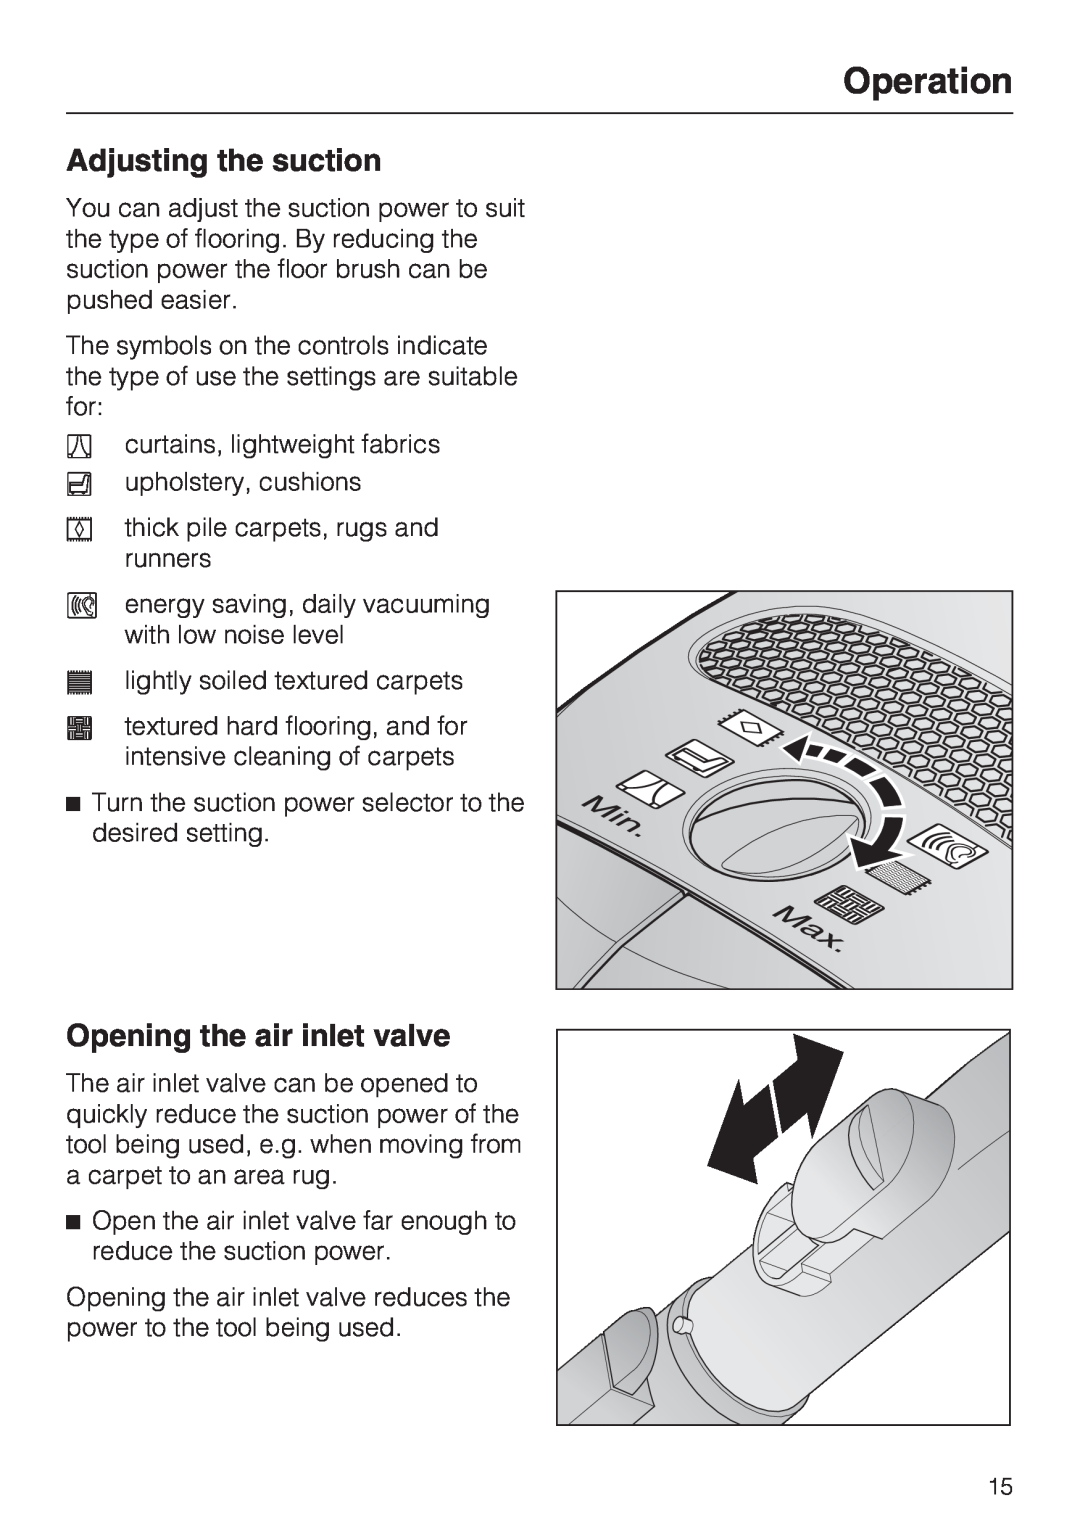 Miele S 2000 operating instructions Adjusting the suction, Opening the air inlet valve, Operation 